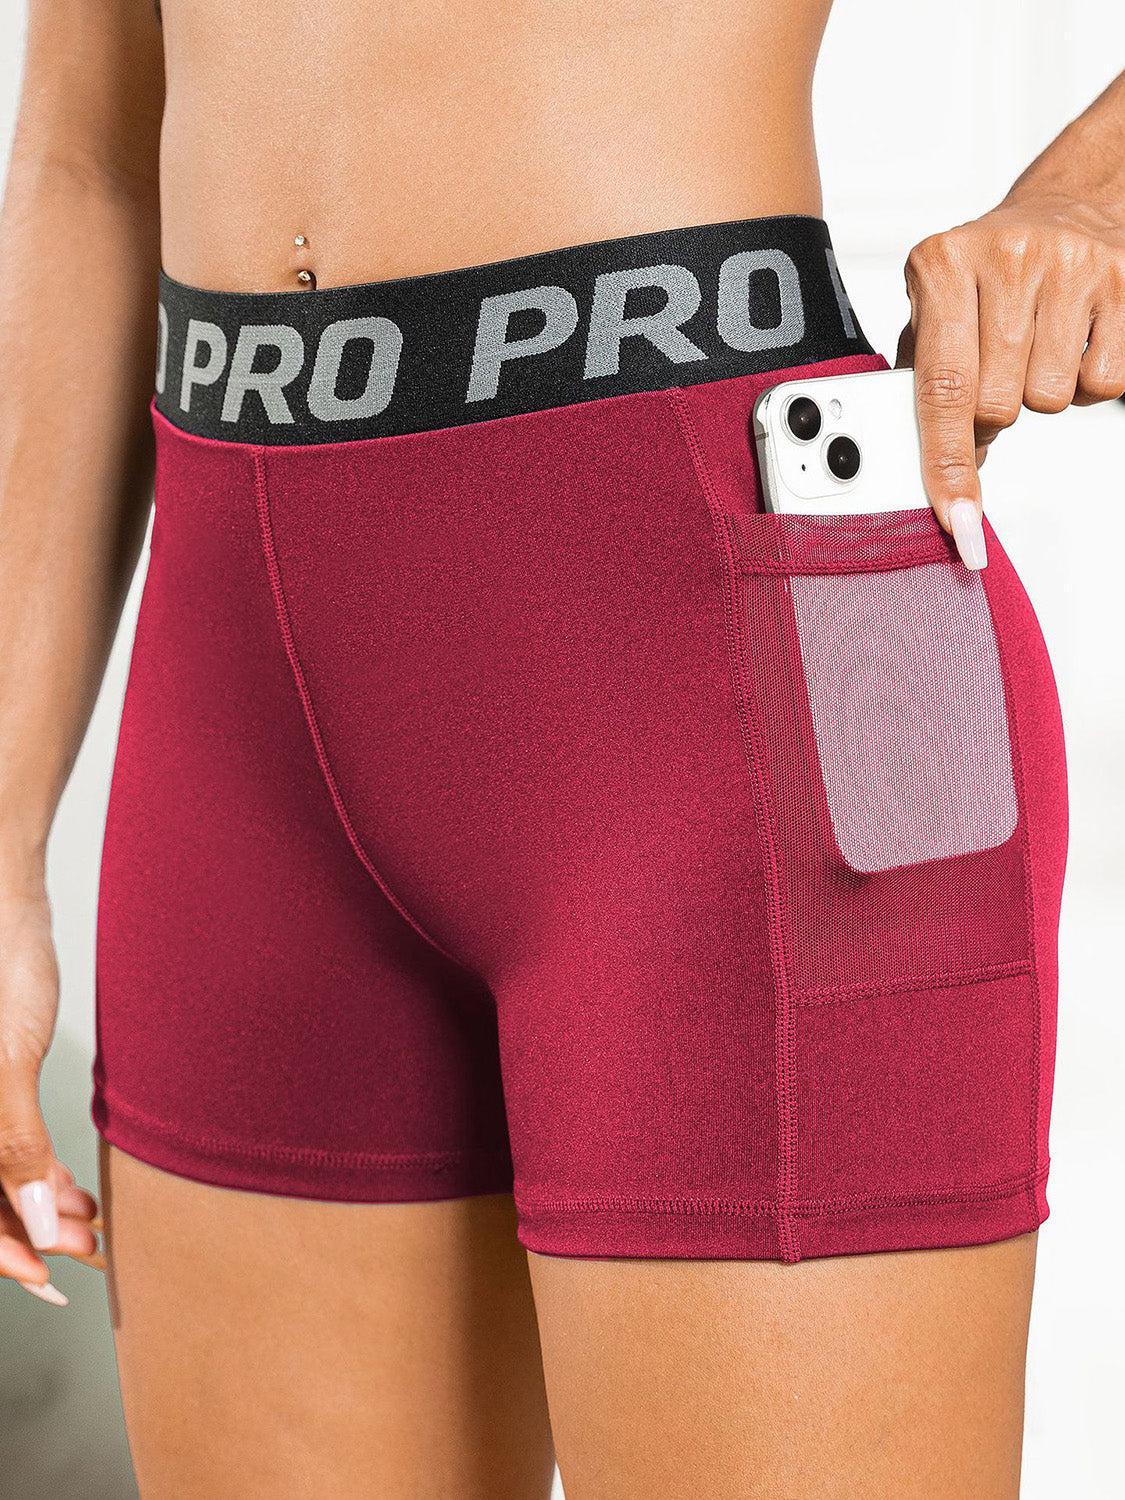 a woman in red shorts holding a cell phone in her pocket